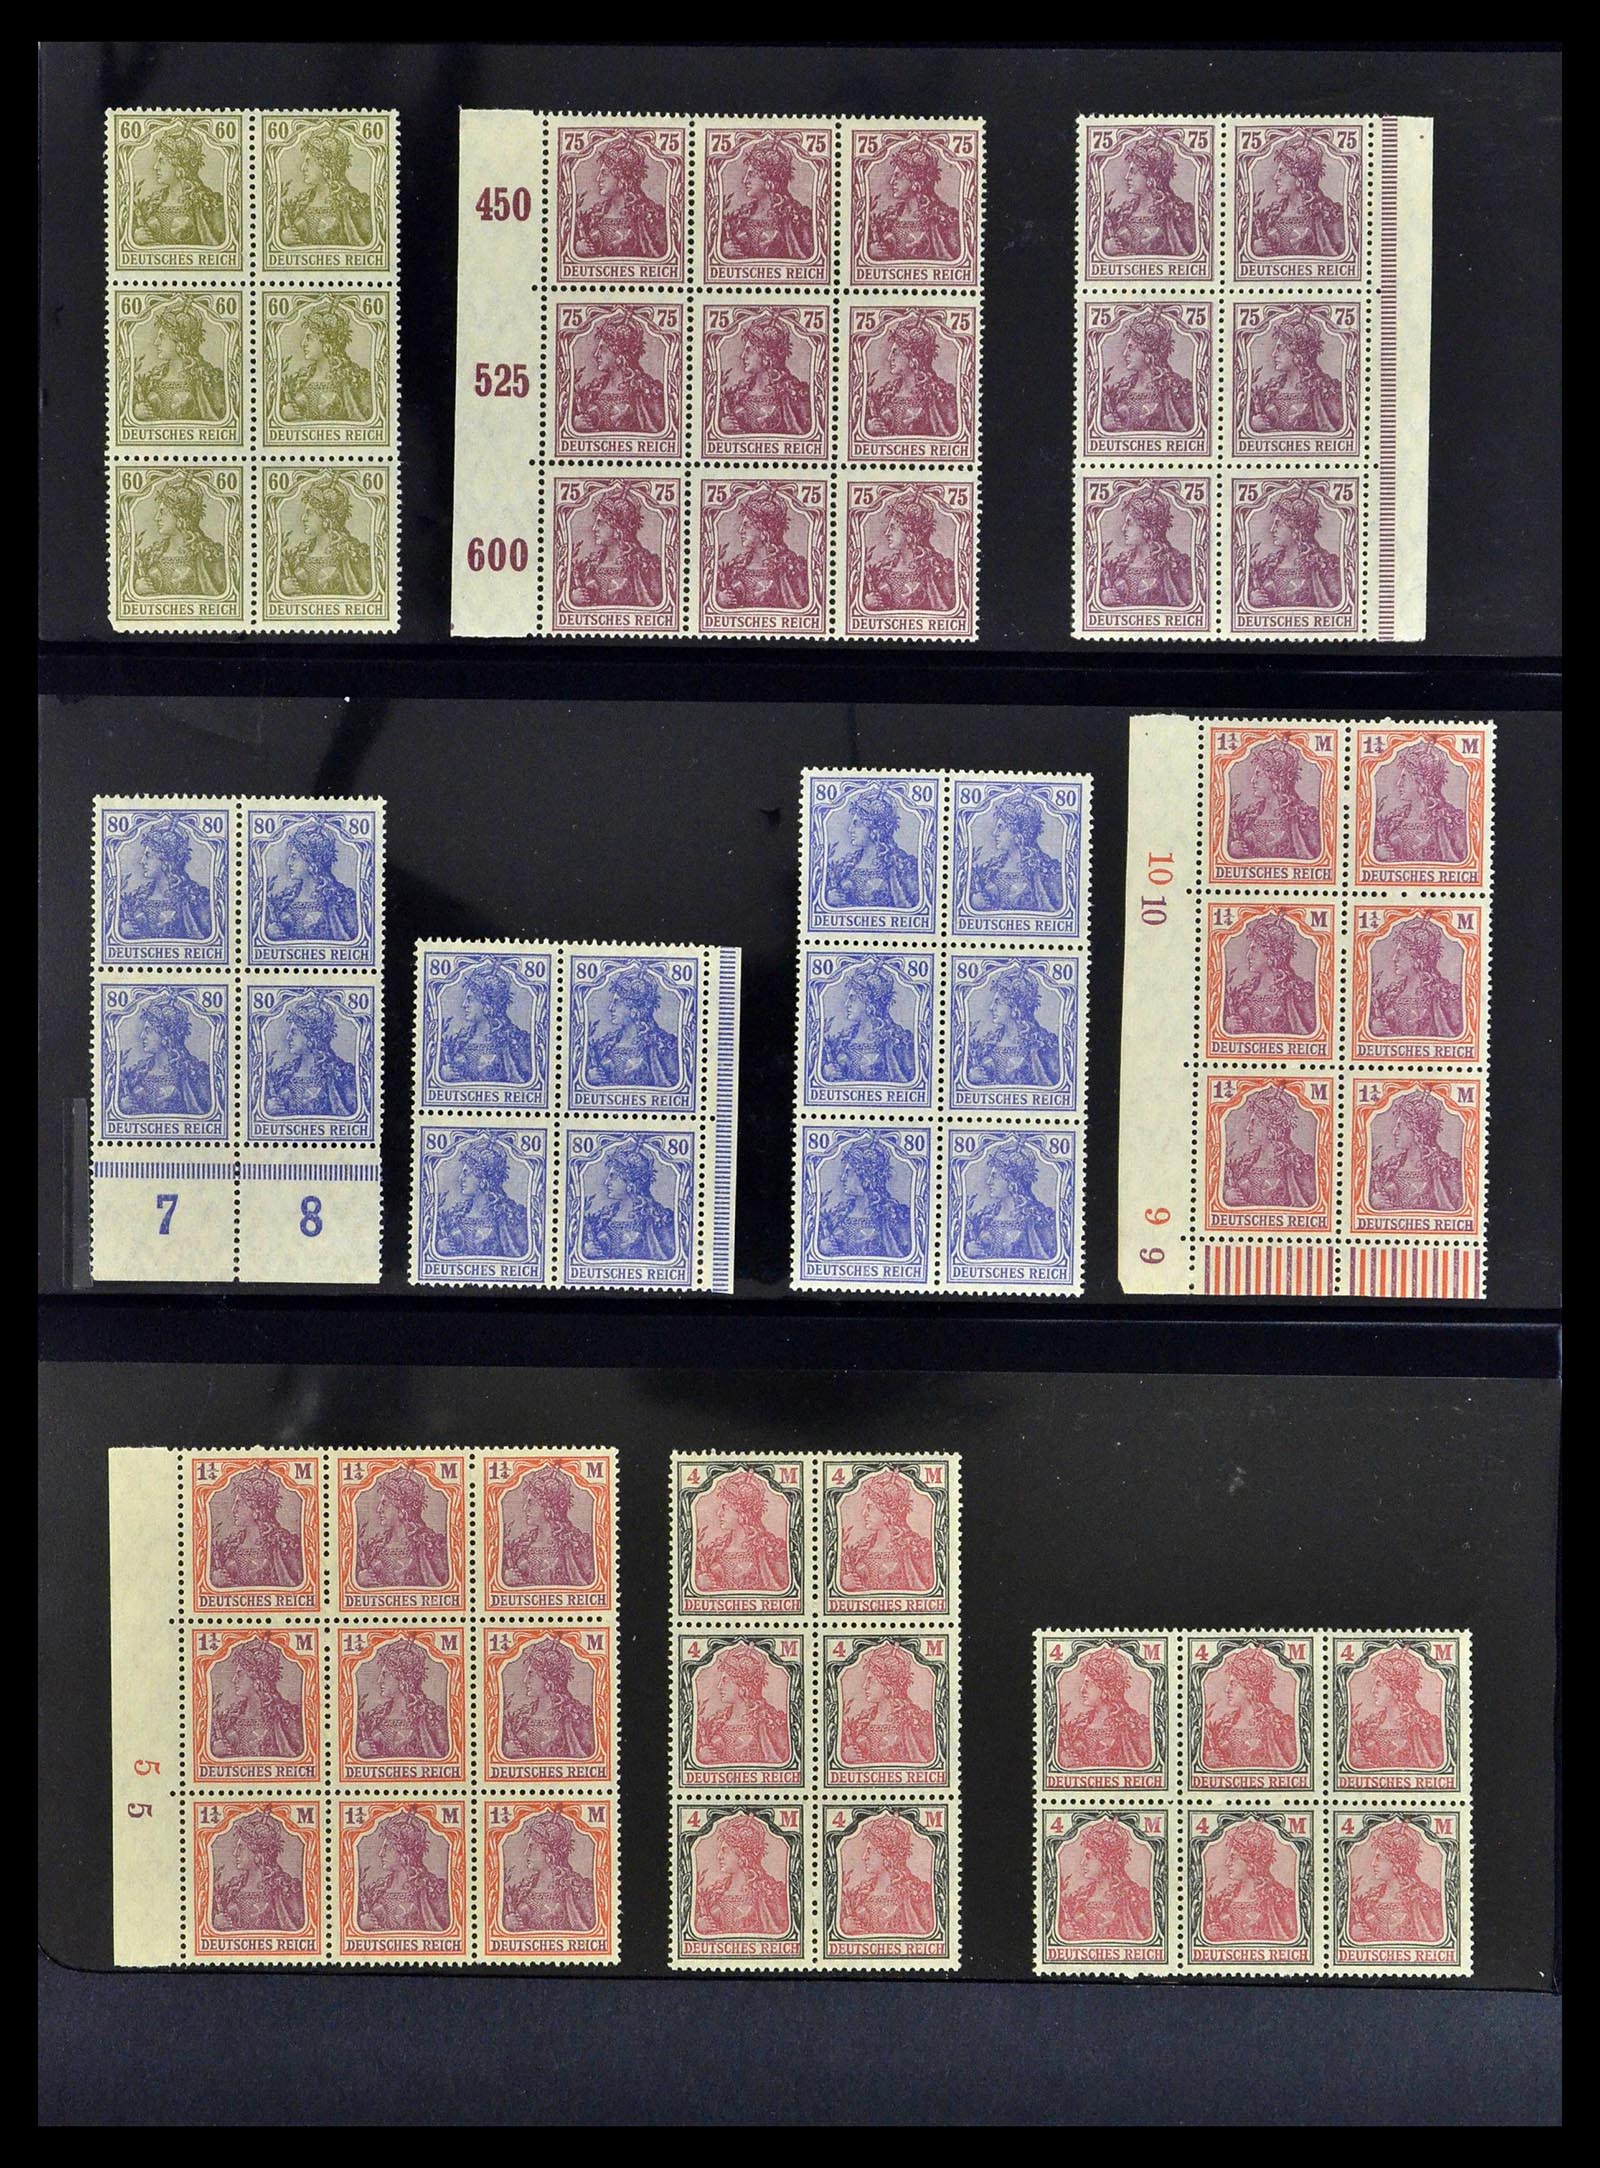 39255 0008 - Stamp collection 39255 German Reich MNH blocks of 4.